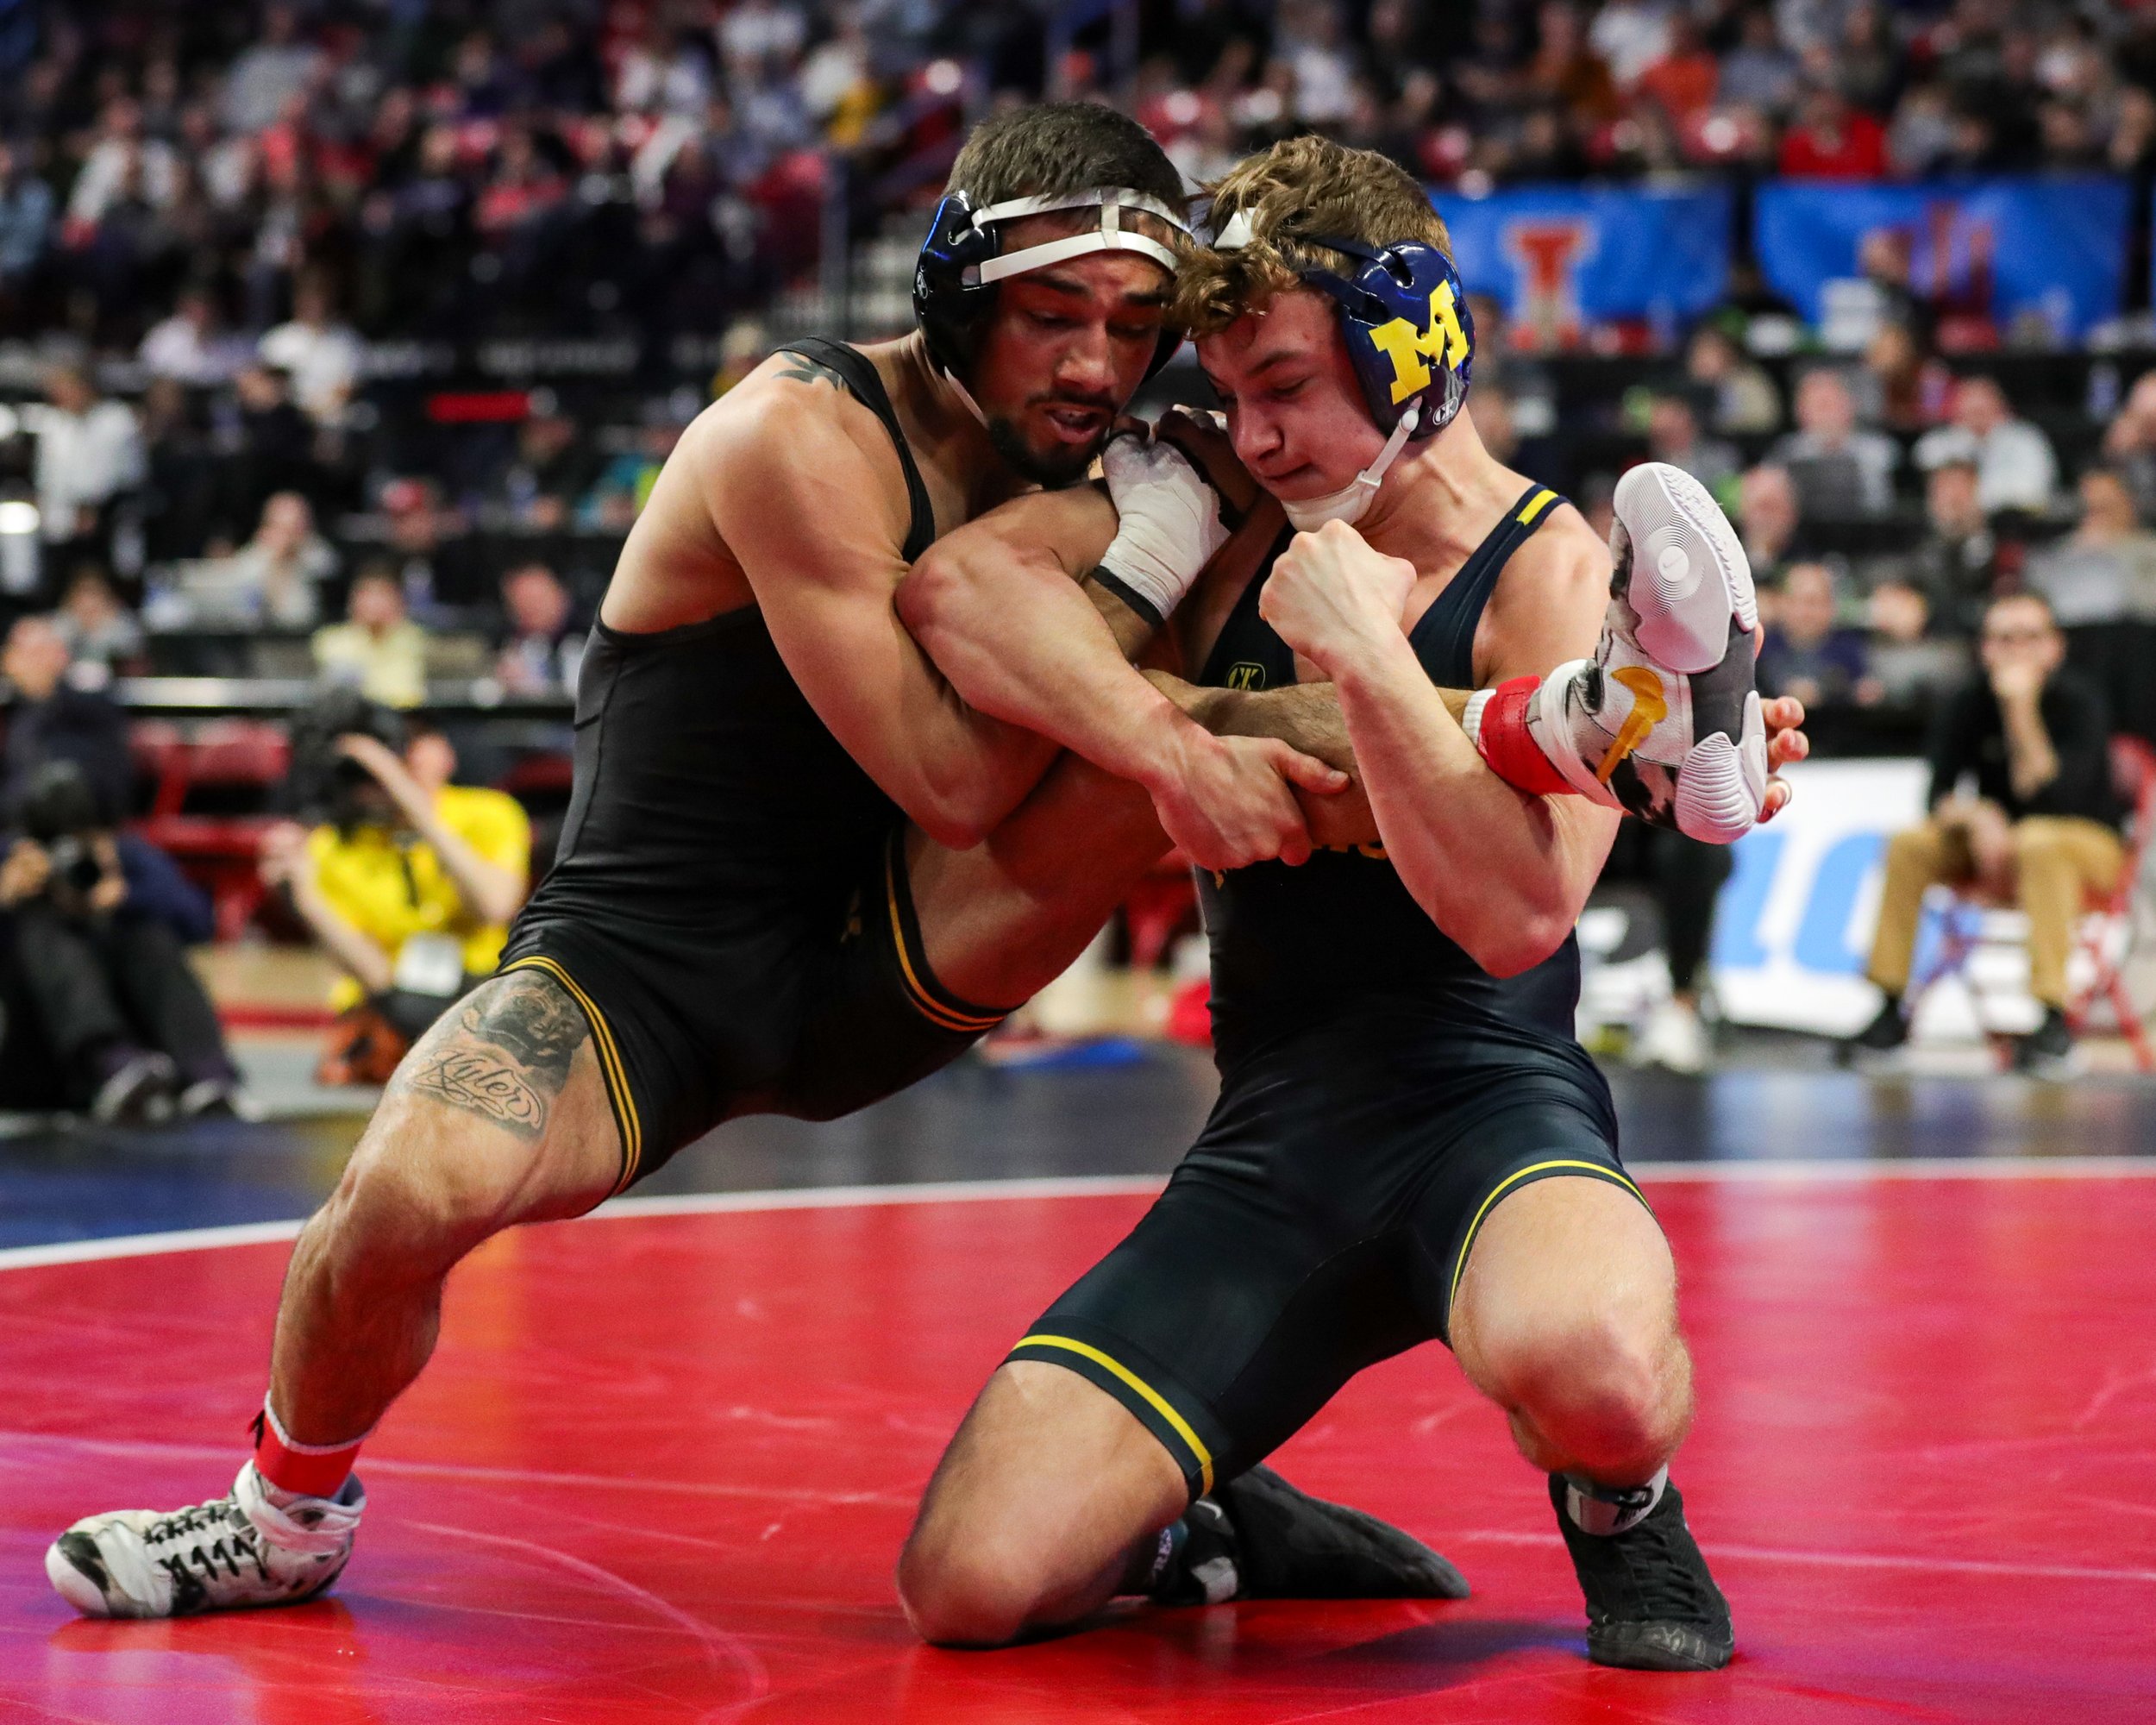  Iowa wrestler Real Woods grapples with Michigan’s Sergio Lemley in a 141-lb third-place match during the Big Ten Wrestling Championships at the Xfinity Center in College Park, Maryland on Sunday, March 10, 2023. Woods won 11-8. (David Harmantas/For 